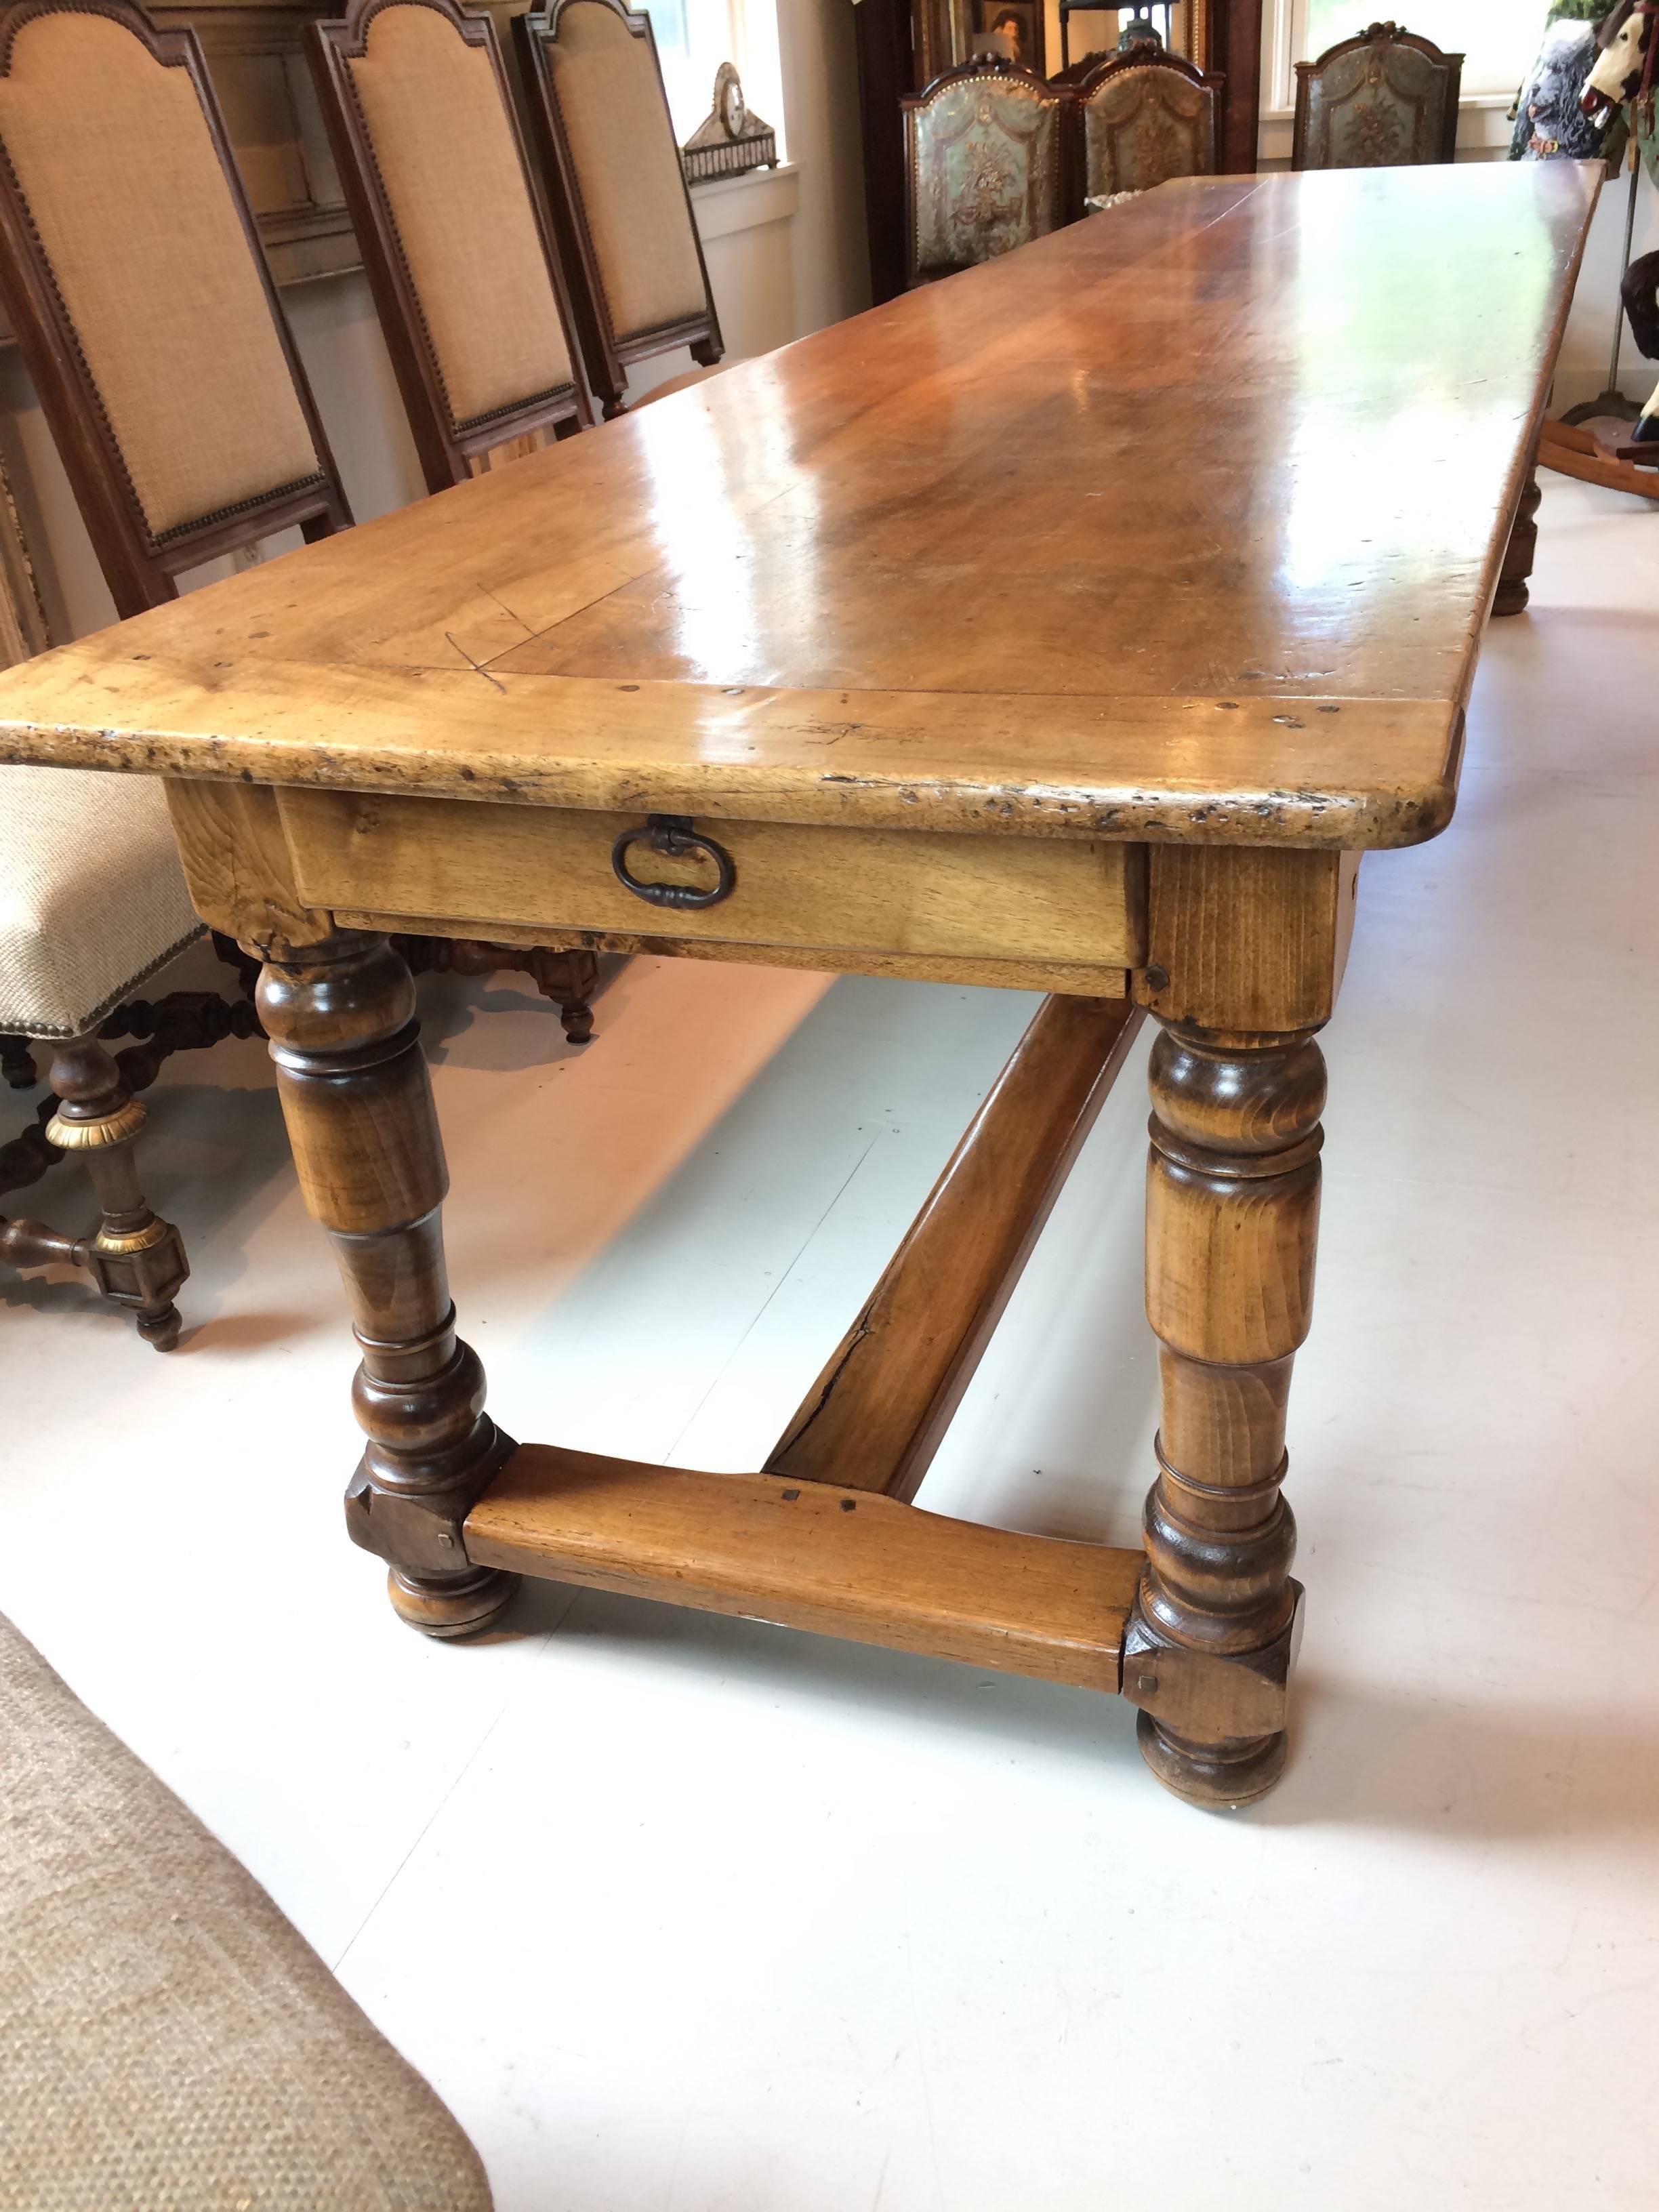 18th century French walnut refectory table from Isle-sur-la-Sorgue, France. This impressively long, elegant walnut table has a stretcher made with antique wood handsomely hand-carved legs and a drawer at each end. It's in excellent condition with a